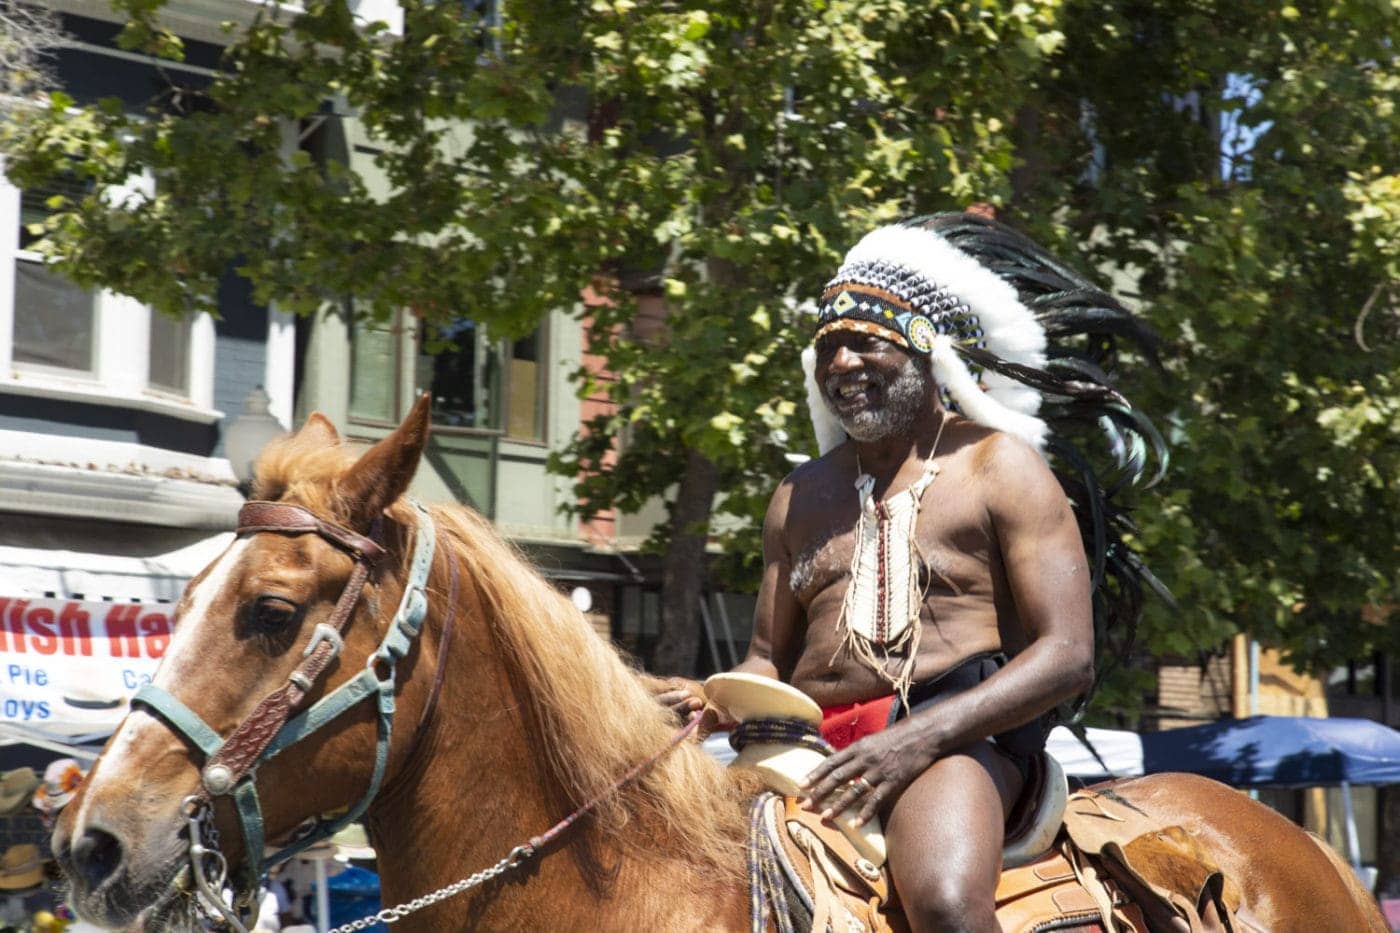 Thomas-Leonard-horse-Paco-at-Berkeley-Juneteenth-Festival-061922-by-Estafany-Gonzalez-KQED-1400x933, Coopting Juneteenth with a federal holiday, Abolition Now! 